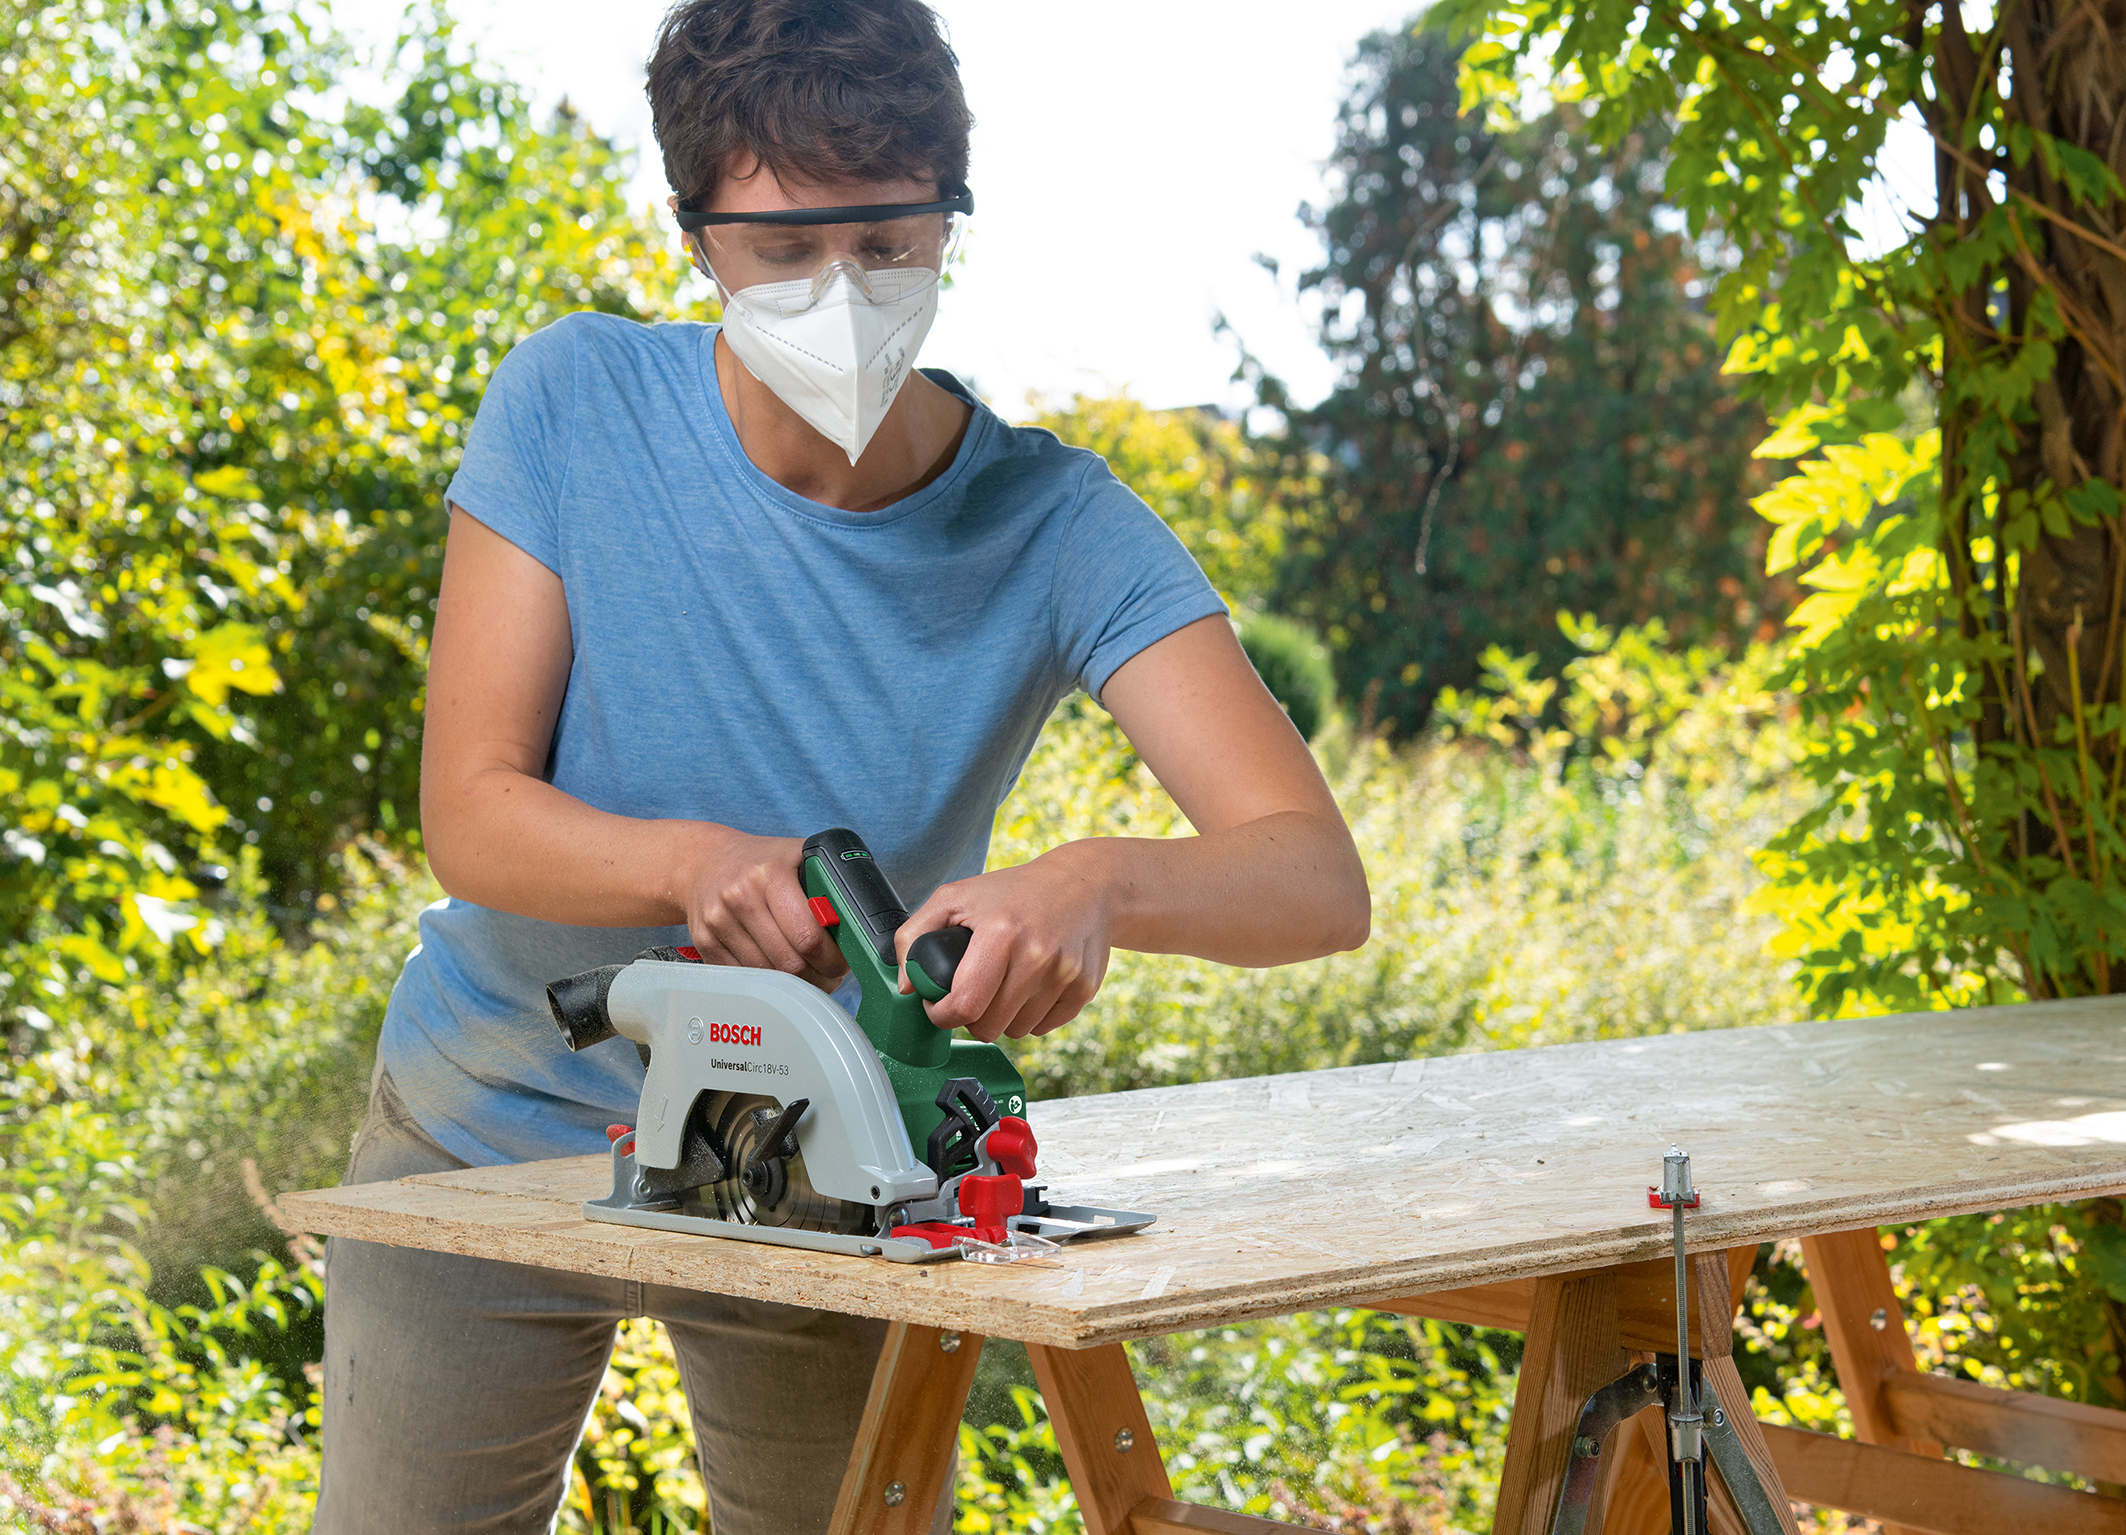 UniversalCirc 18V-53 from Bosch: Cordless hand-held circular saw for long, precise cuts